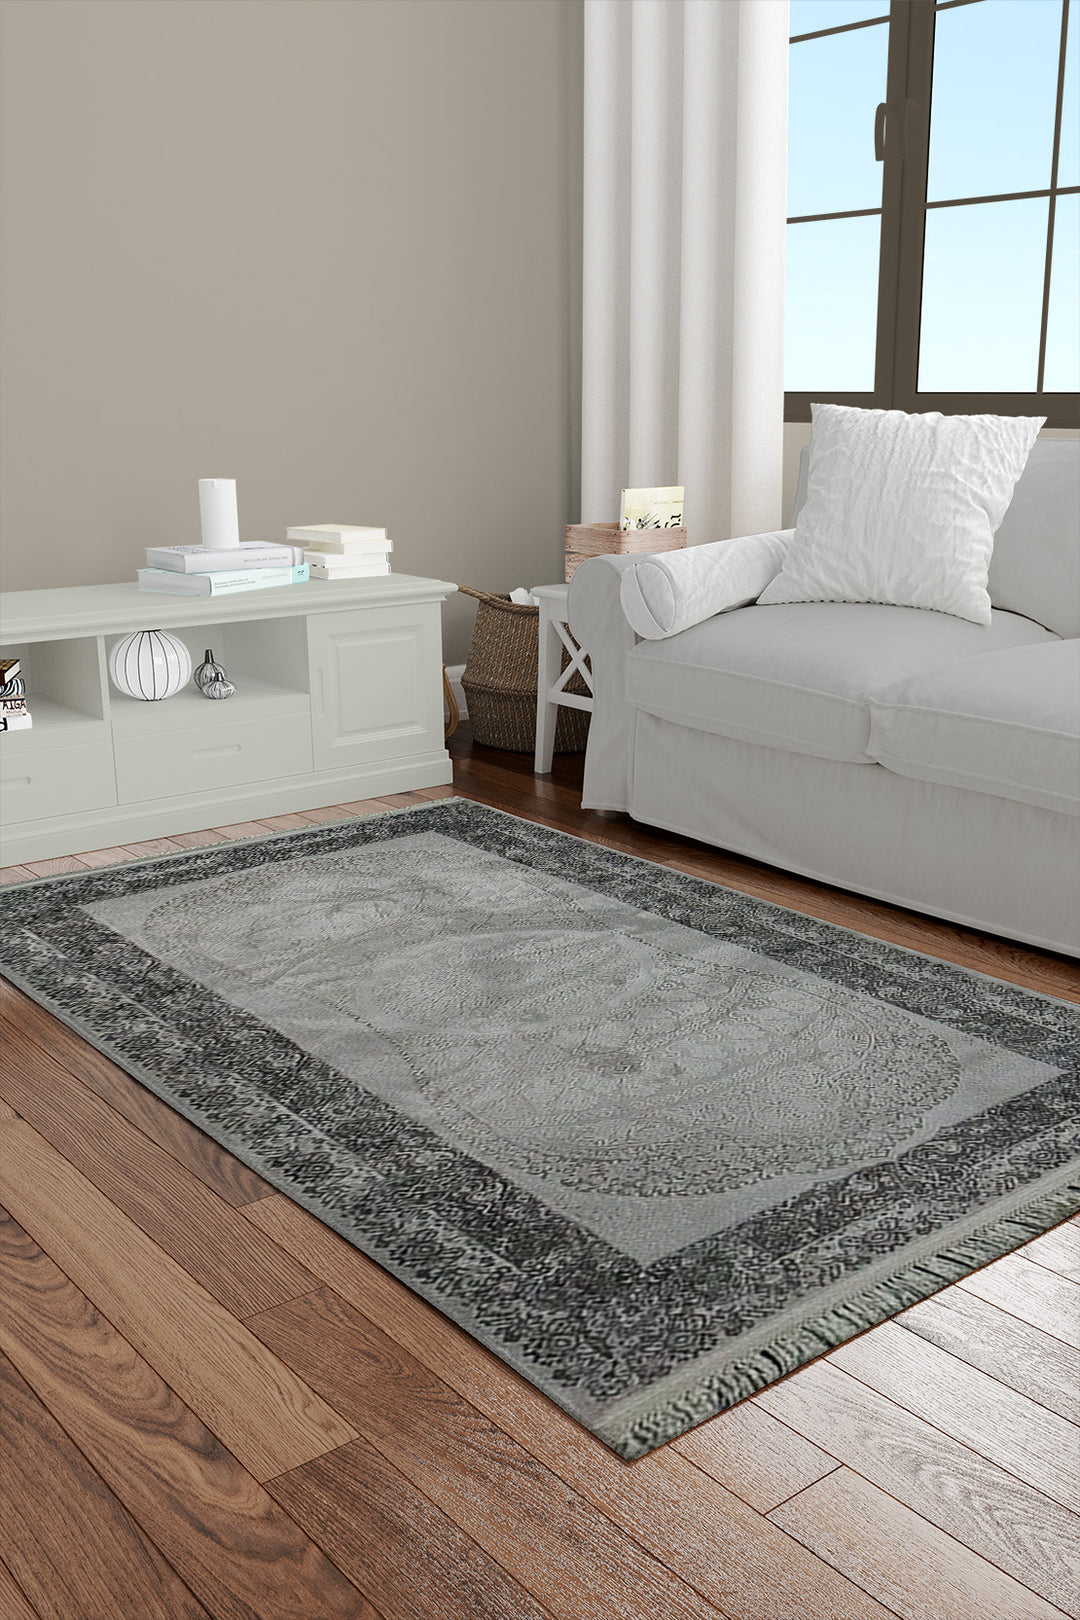 Turkish Premium and Modern Voyage Rug -  3.28 x 6.56 FT - Cream -  Superior Comfort Elegant and Luxary Style Accent